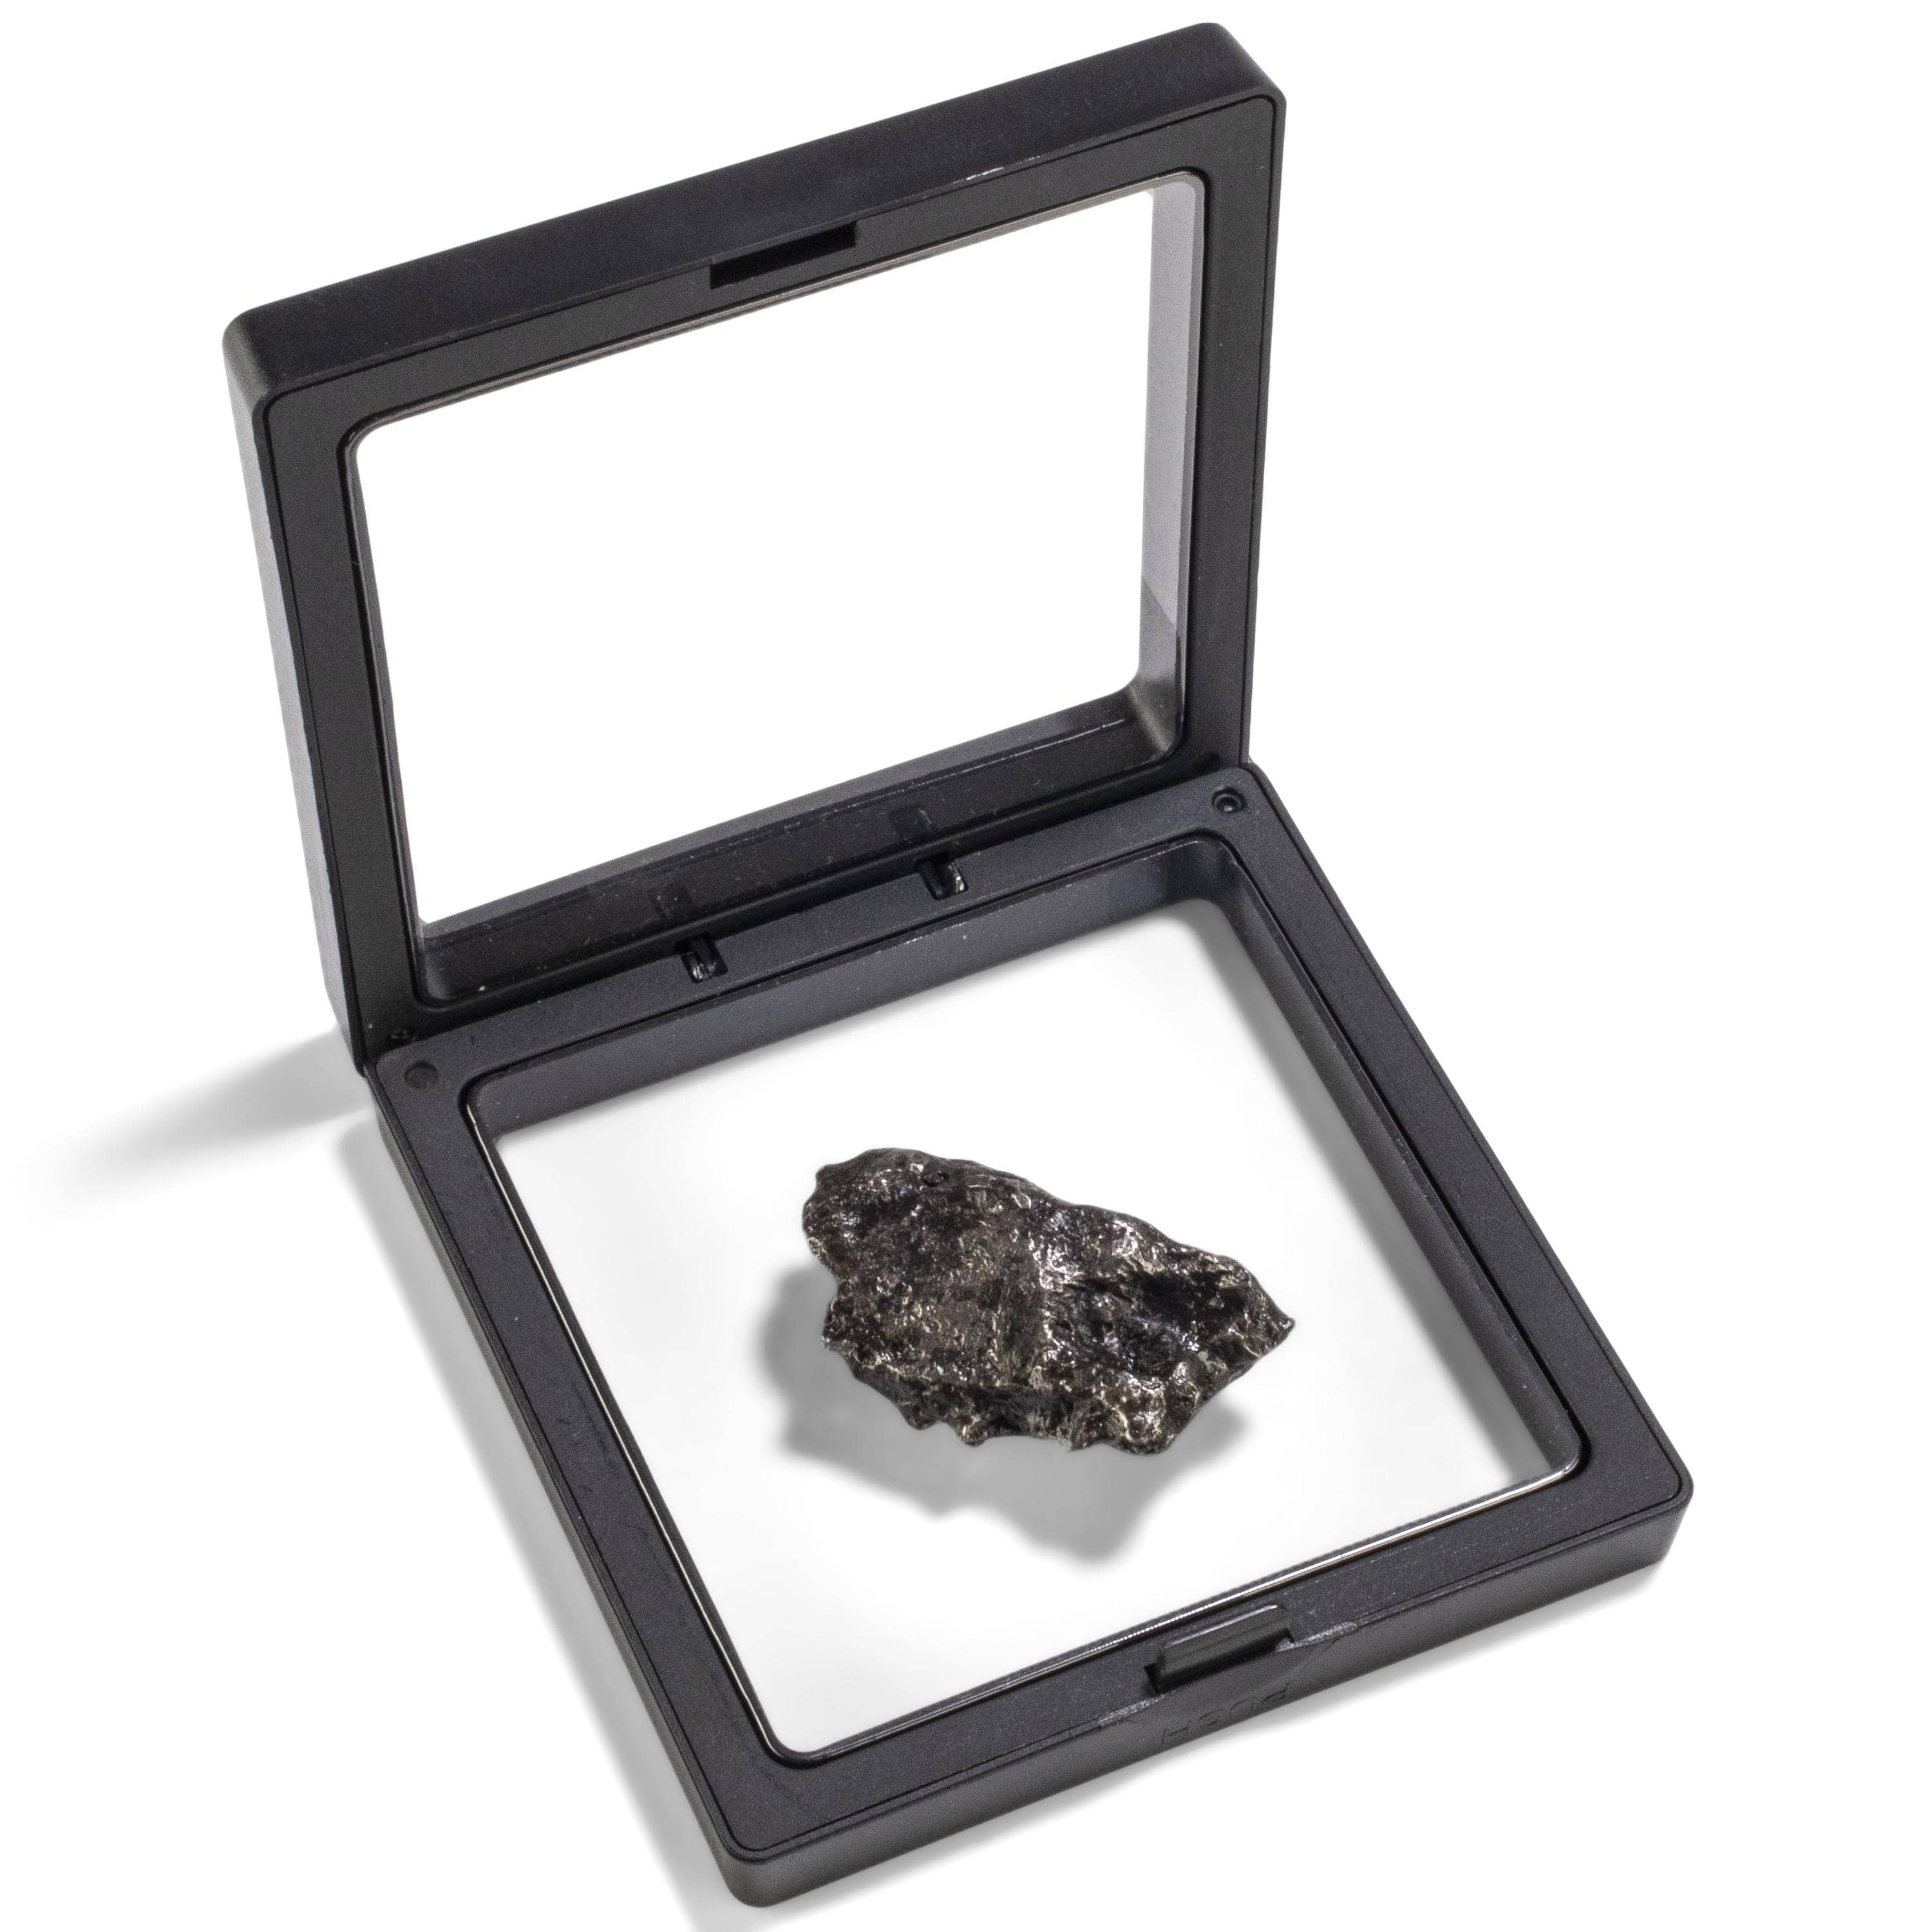 Kalifano Meteorites Sikhote-Alin Iron Meteorite discovered in Russia - 45 grams MTS1000